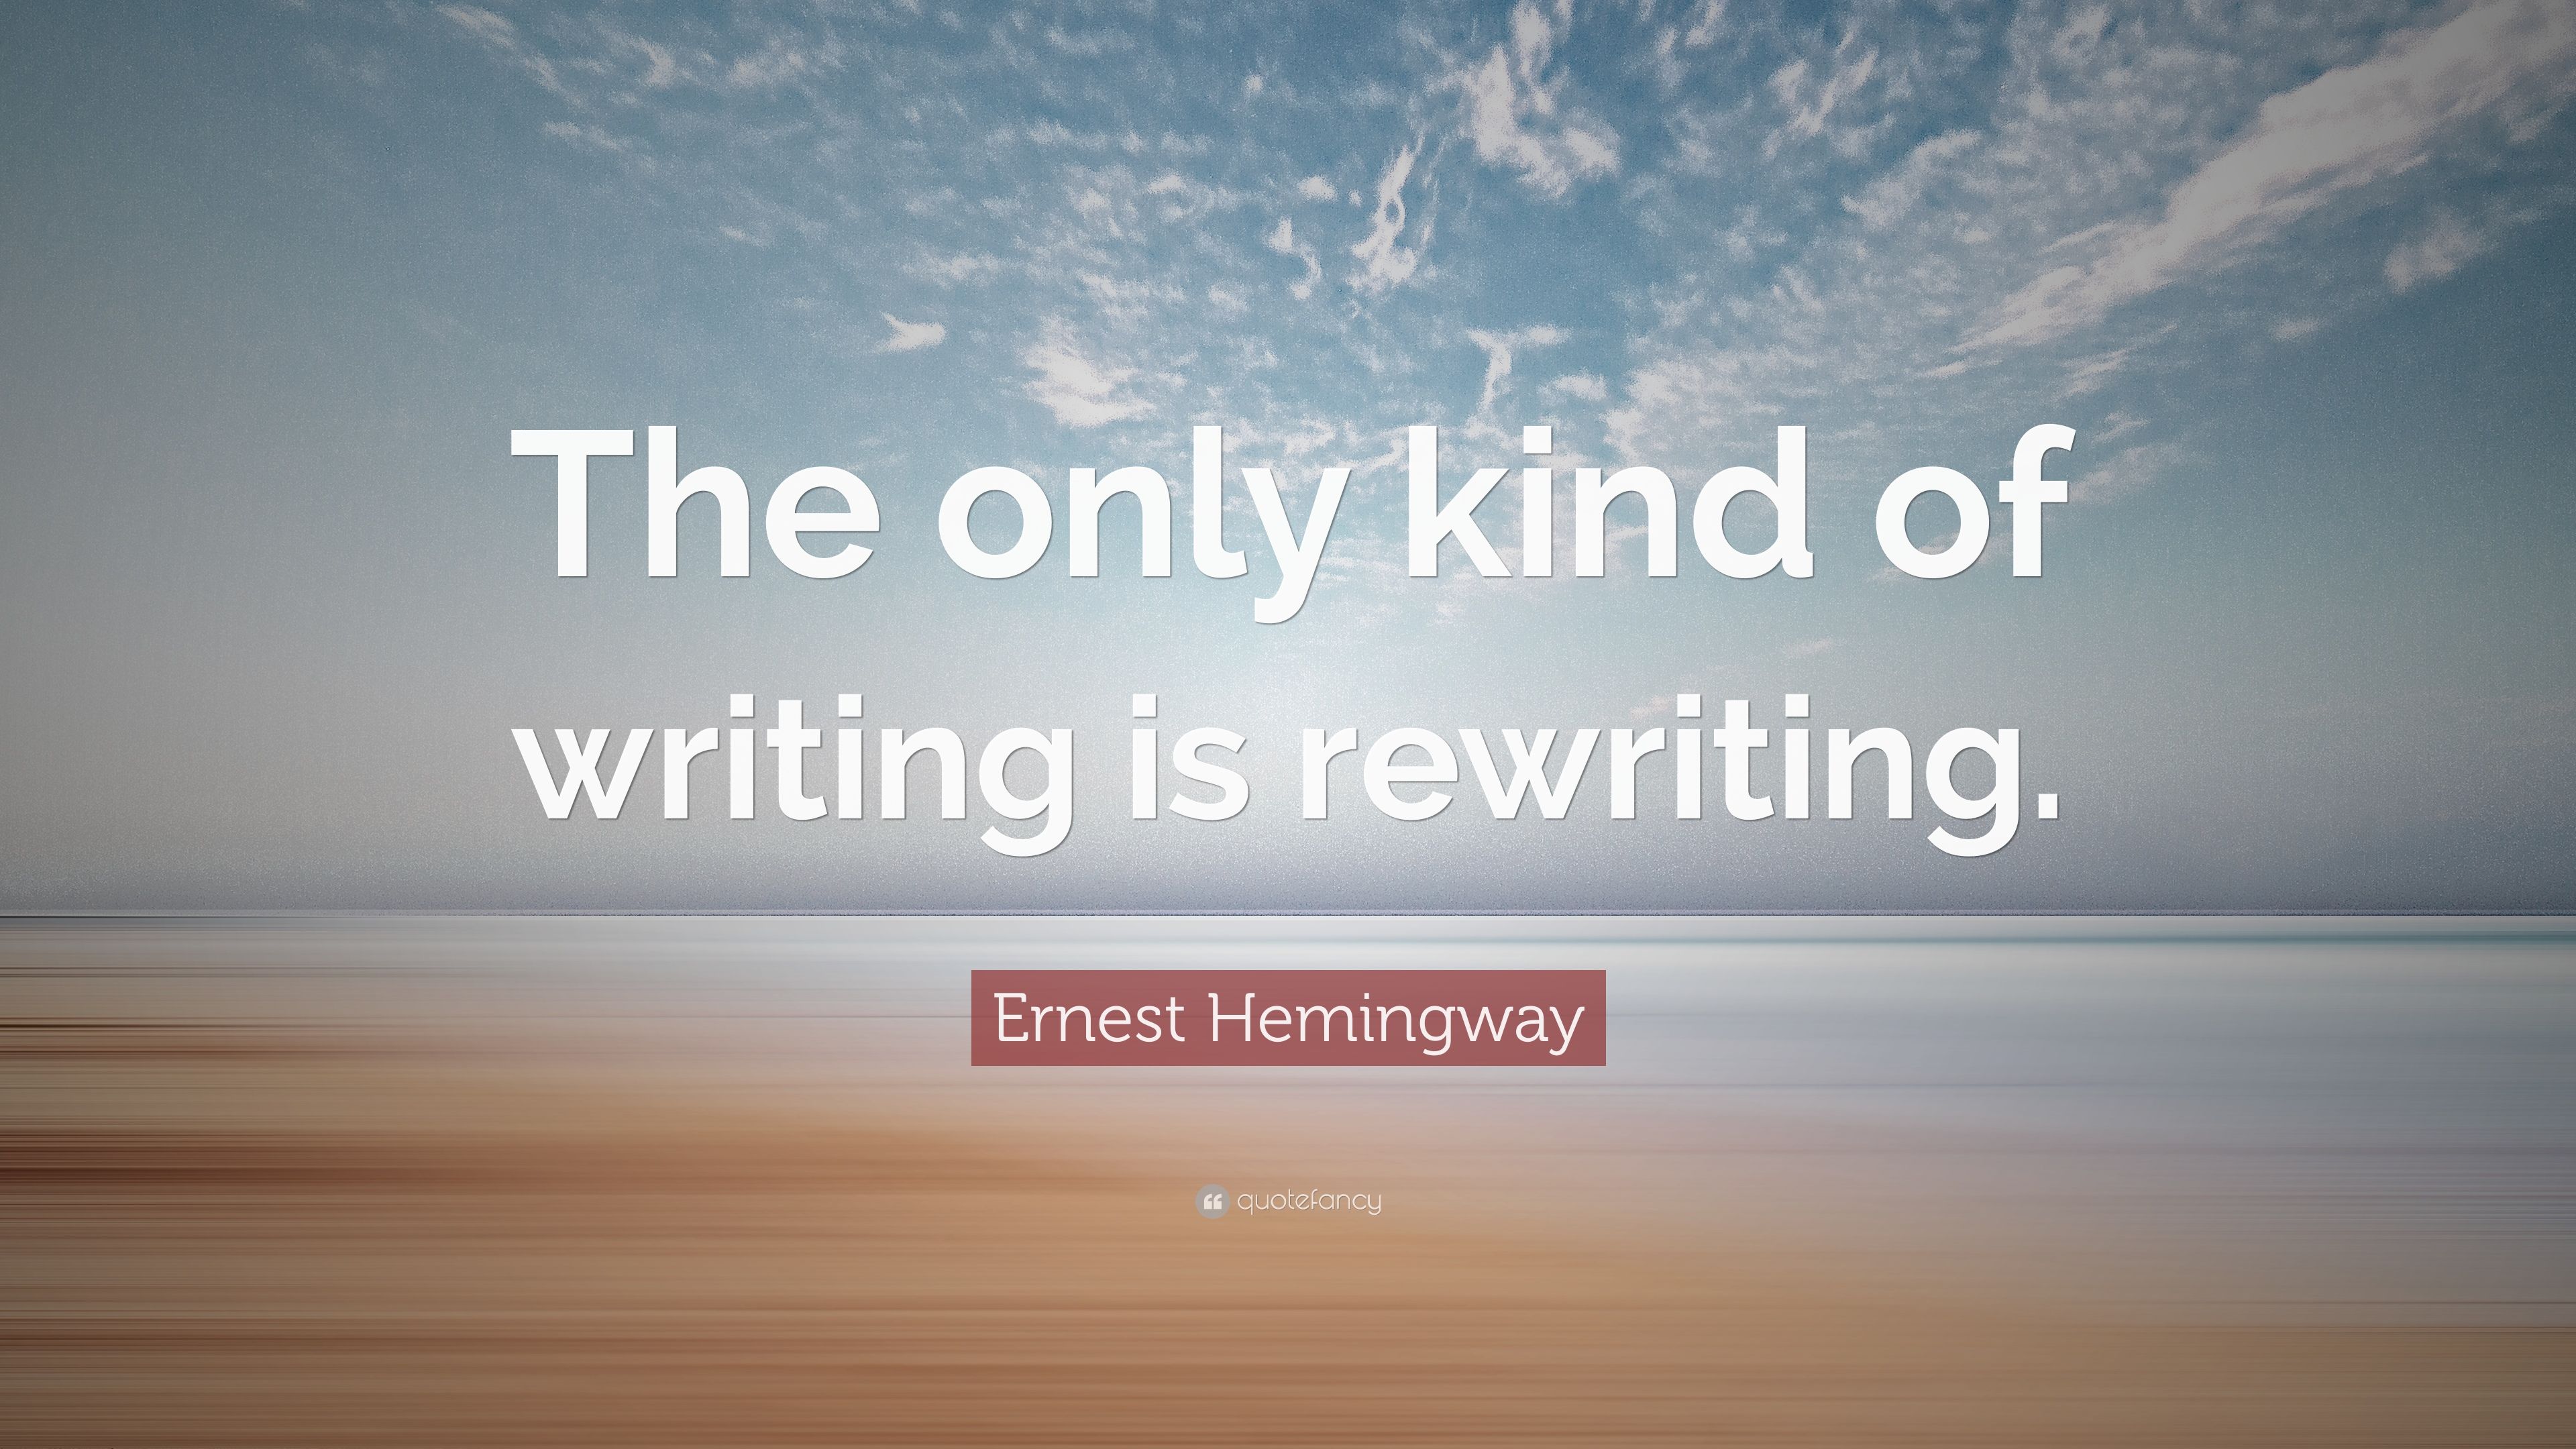 Ernest Hemingway Quote: “The only kind of writing is rewriting